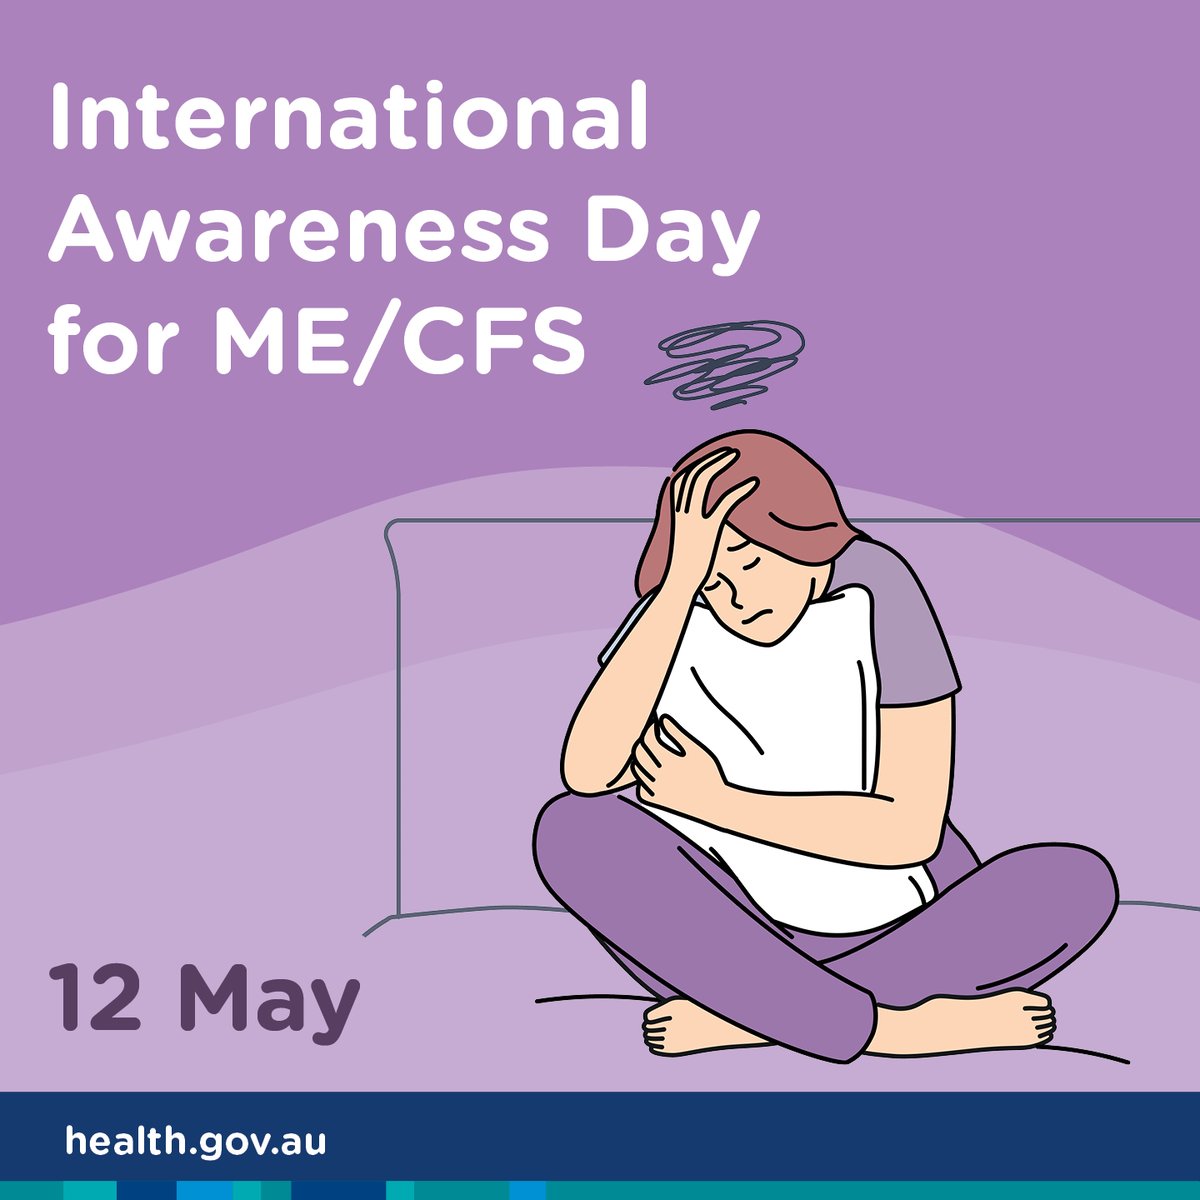 📅 This Sunday is International Awareness Day for ME/CFS, a chronic illness that causes extreme fatigue & can lead to symptoms like, post exertional malaise, memory loss, sleep disturbances, headaches & sensitivity to light & noise.

Learn more at 💻 healthdirect.gov.au/chronic-fatigu…